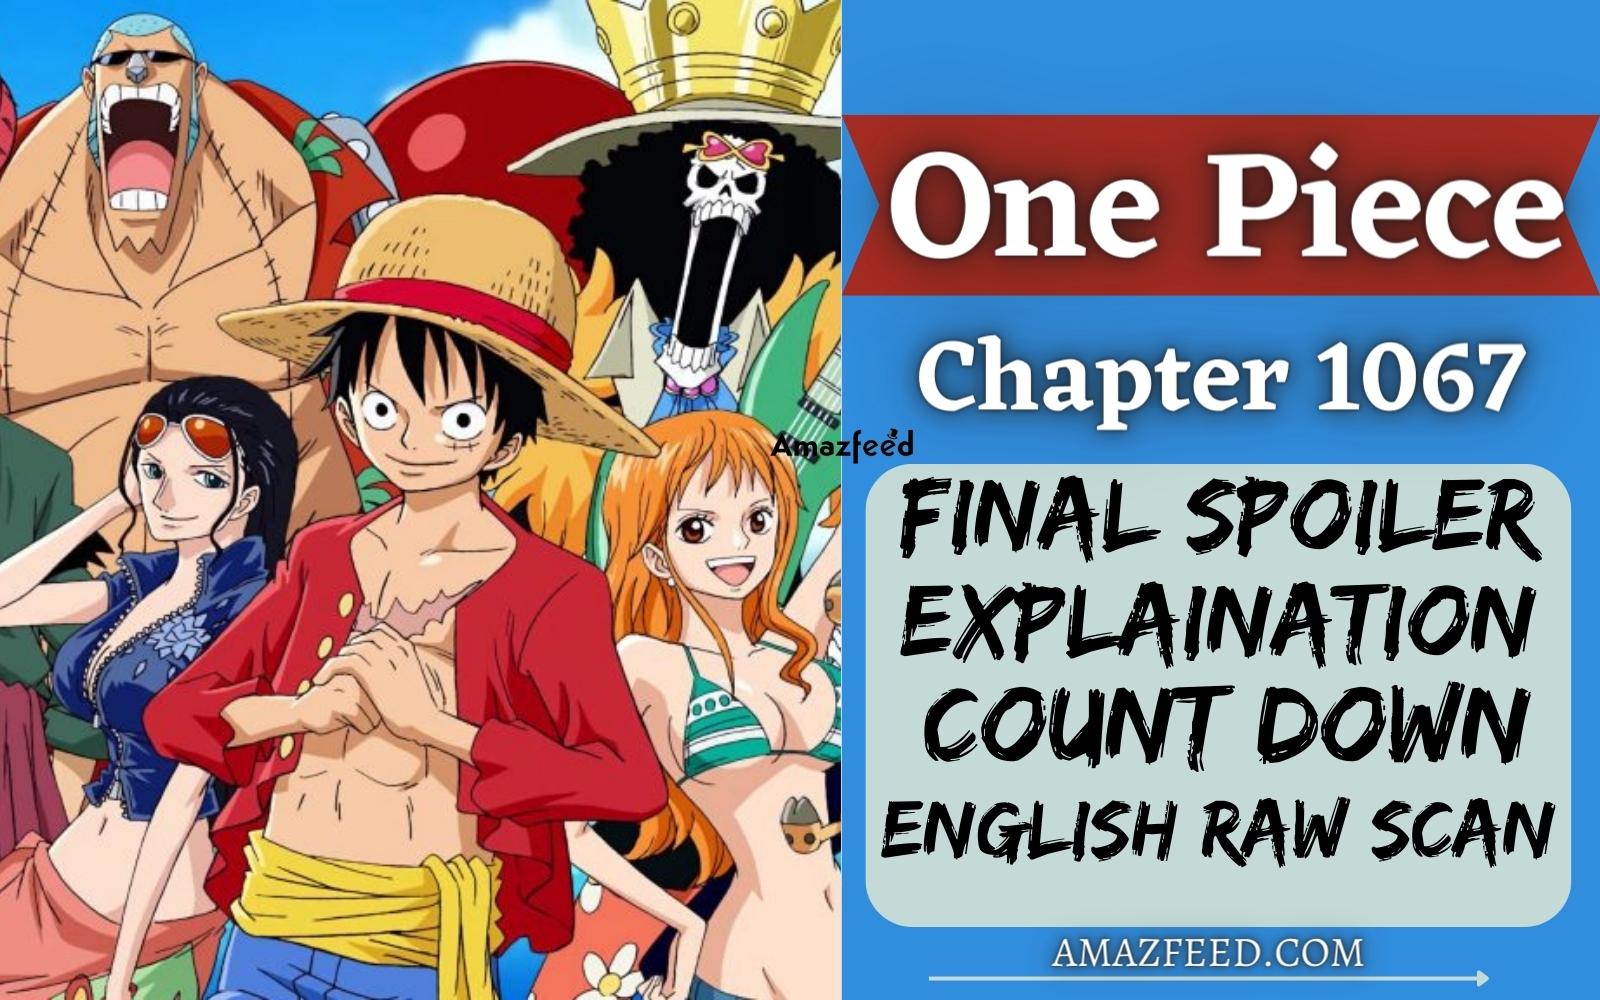 One Piece Chapter 1067 Final Reddit Spoiler Explaination, English Raw Scan, Release Date, Count Down